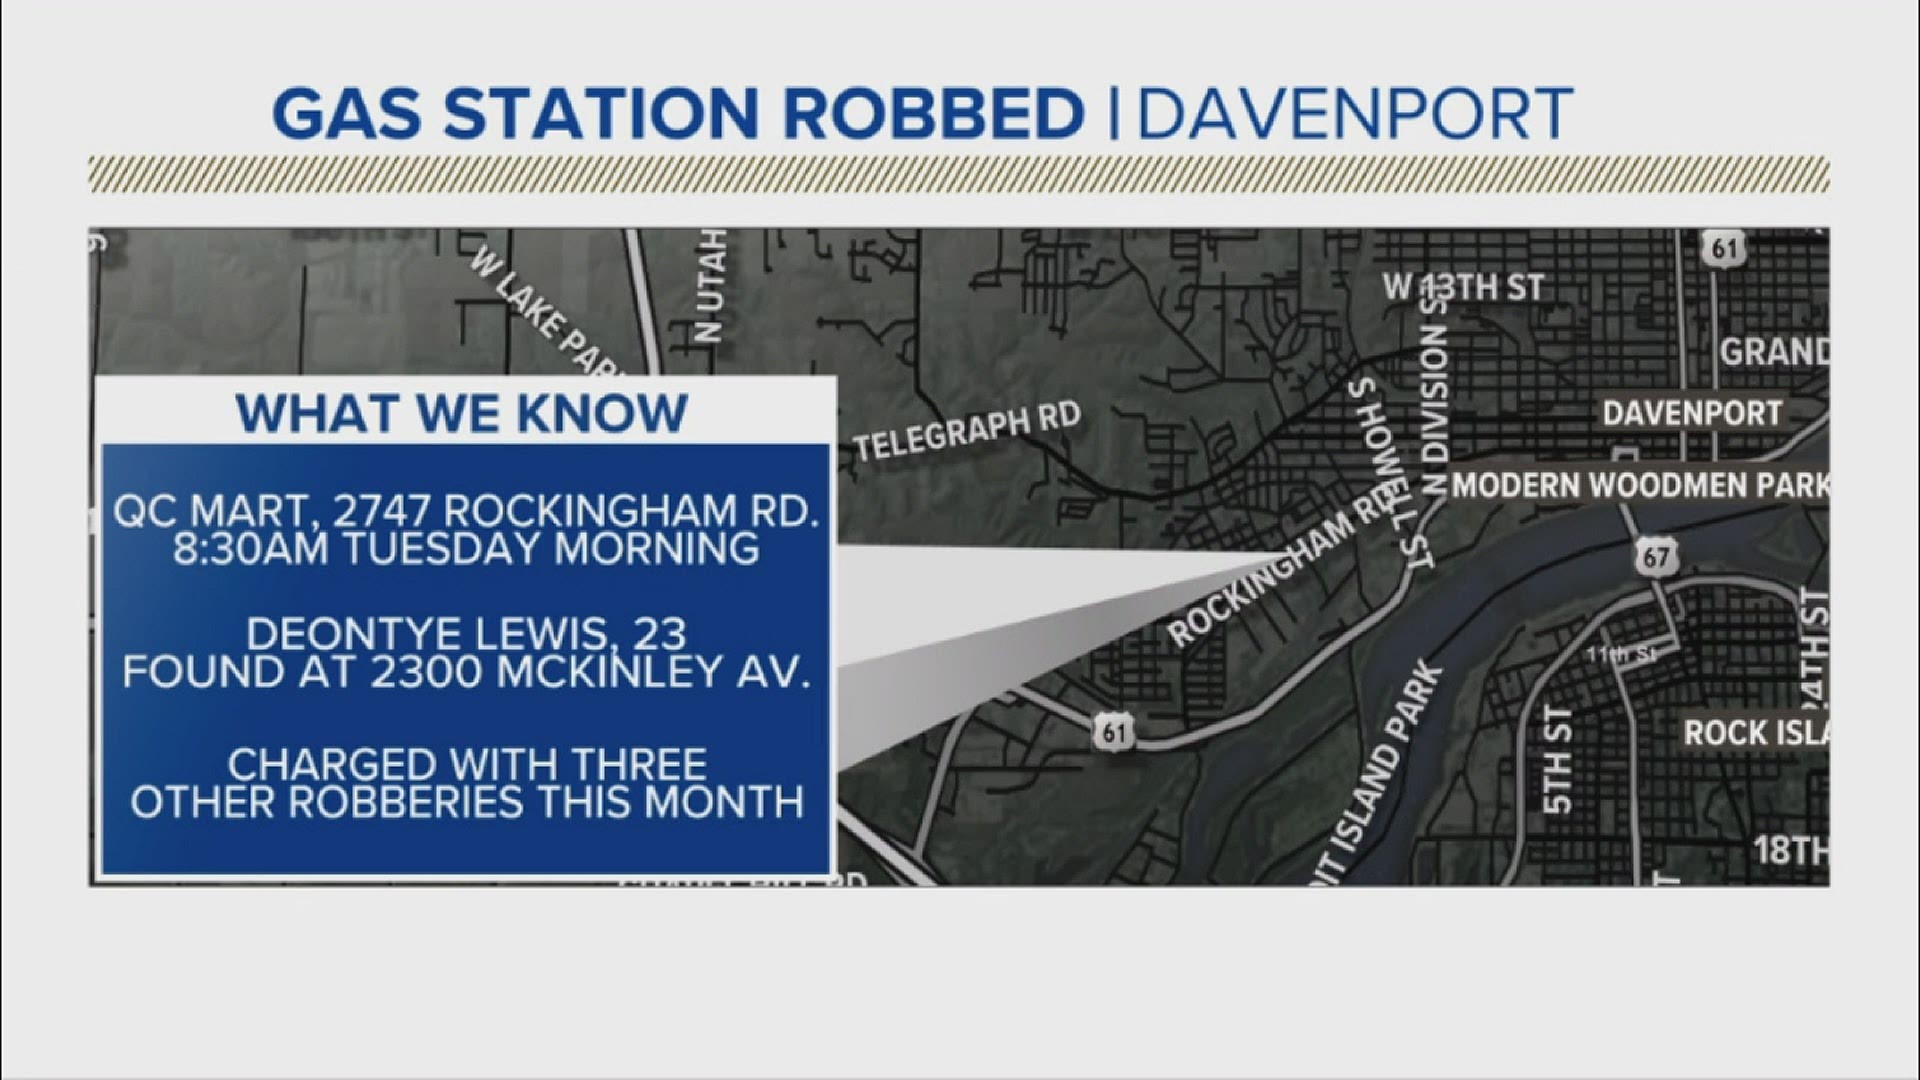 The robberies took place over the span of five days.